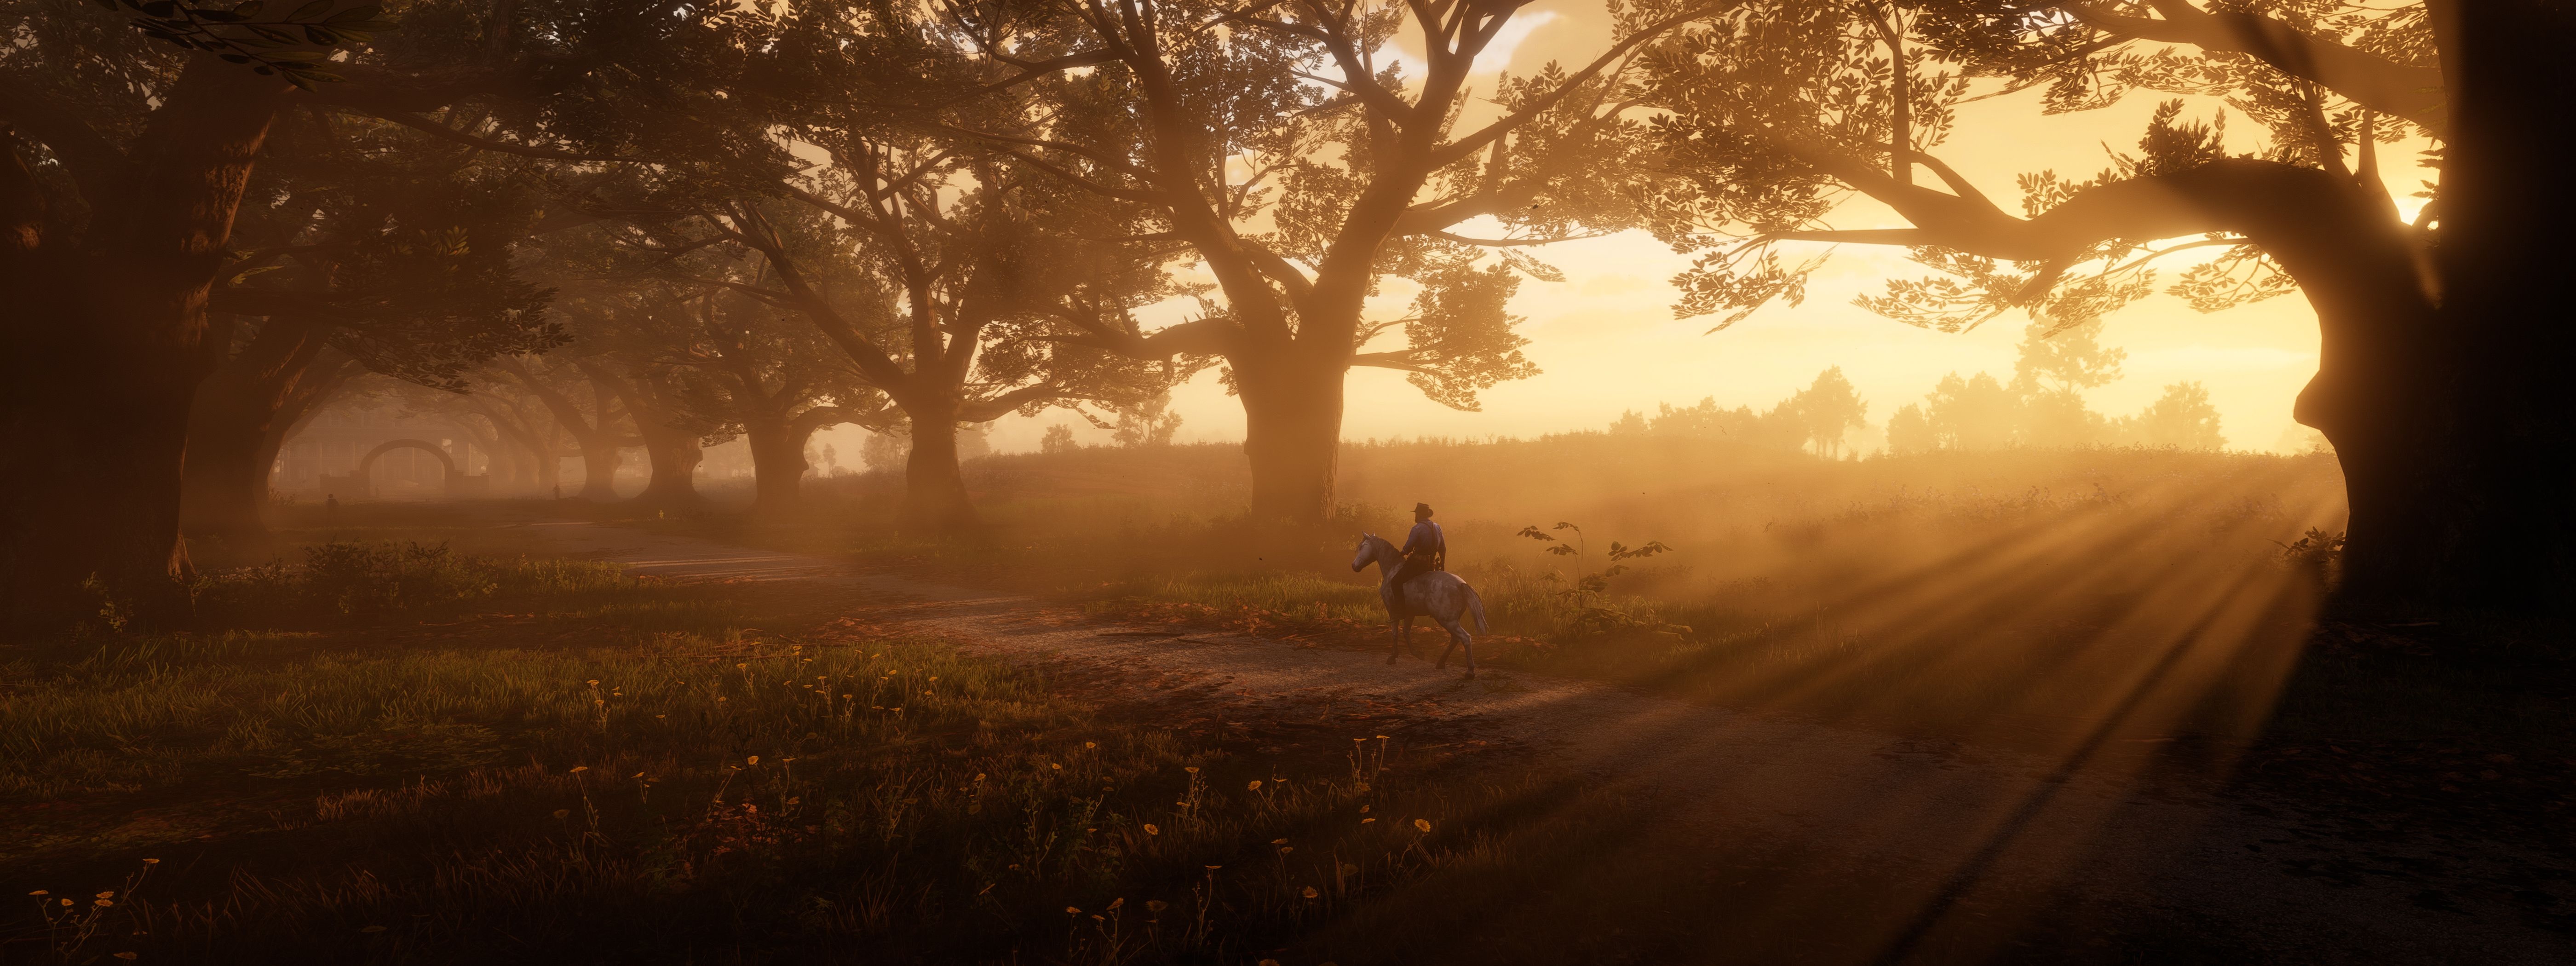 Wallpaper 4k Red Dead Redemption 2 The Path Red Dead Redemption 2 The Path 4k wallpaper, Red Dead Redemption 2 The Path wallpaper